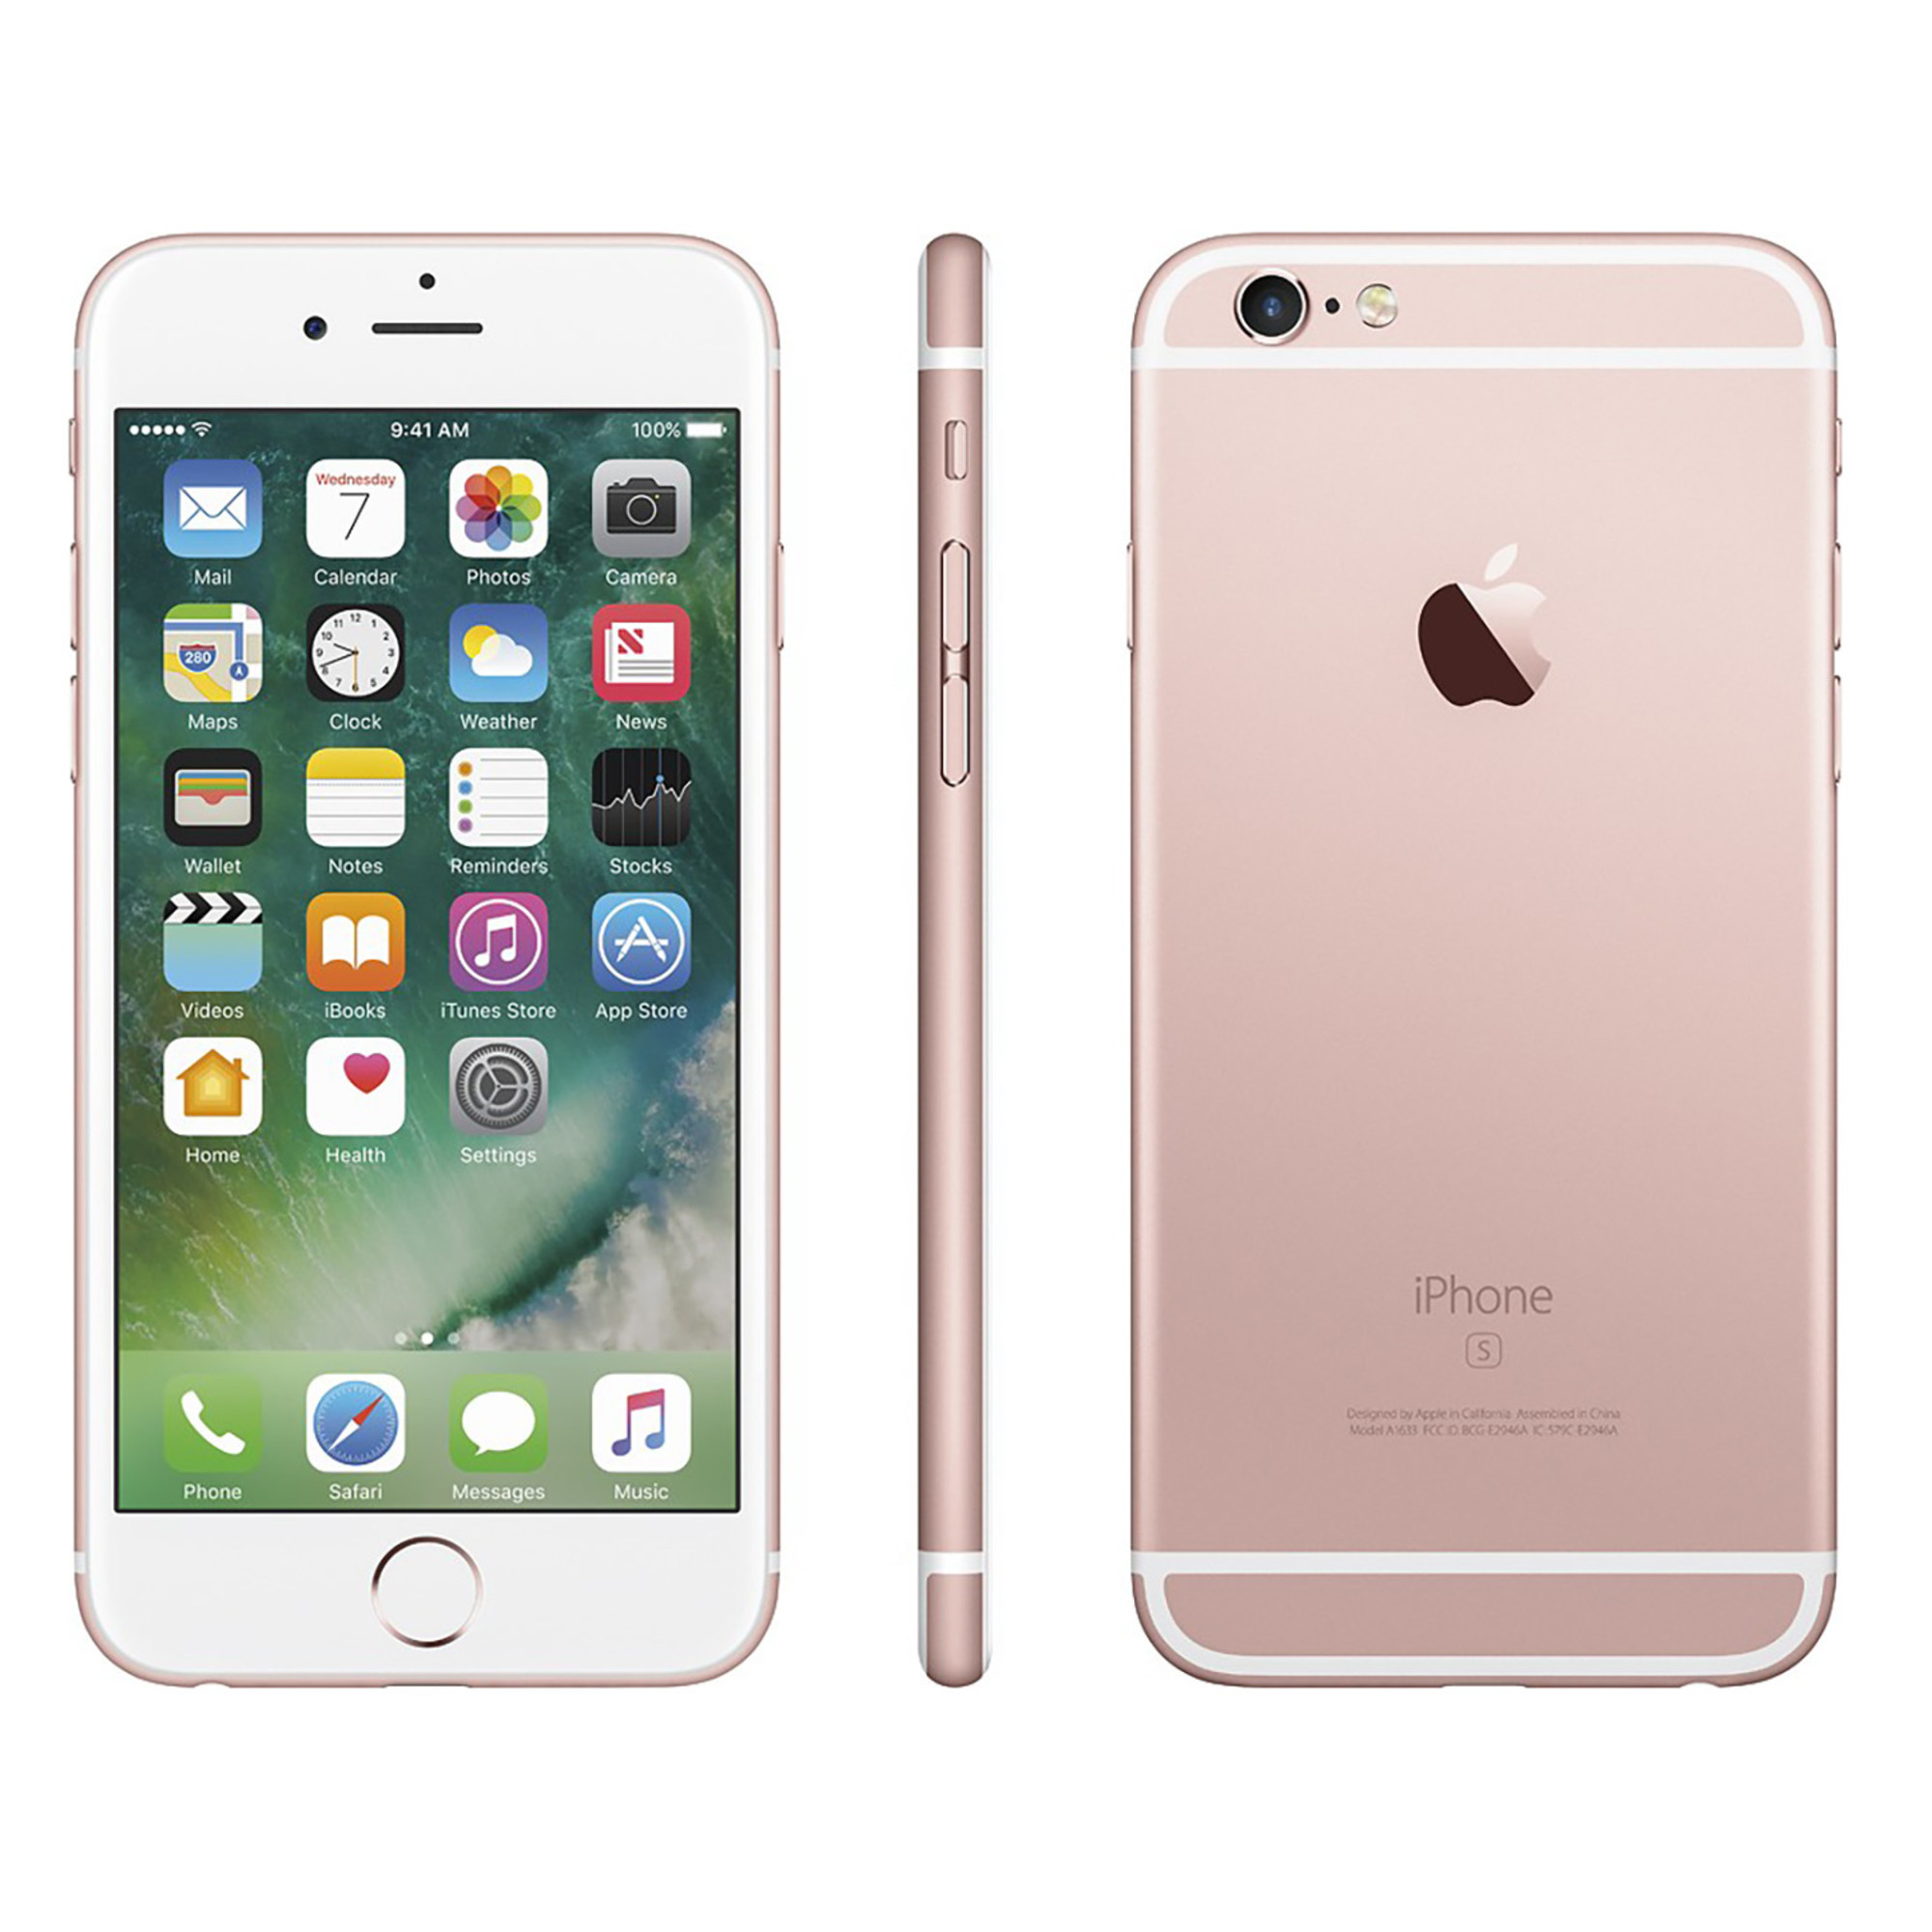 Apple iPhone 6s 64GB GSM Phone - Rose Gold (Used) + WeCare Alcohol Wipes Pack (50 Wipes) - image 4 of 6